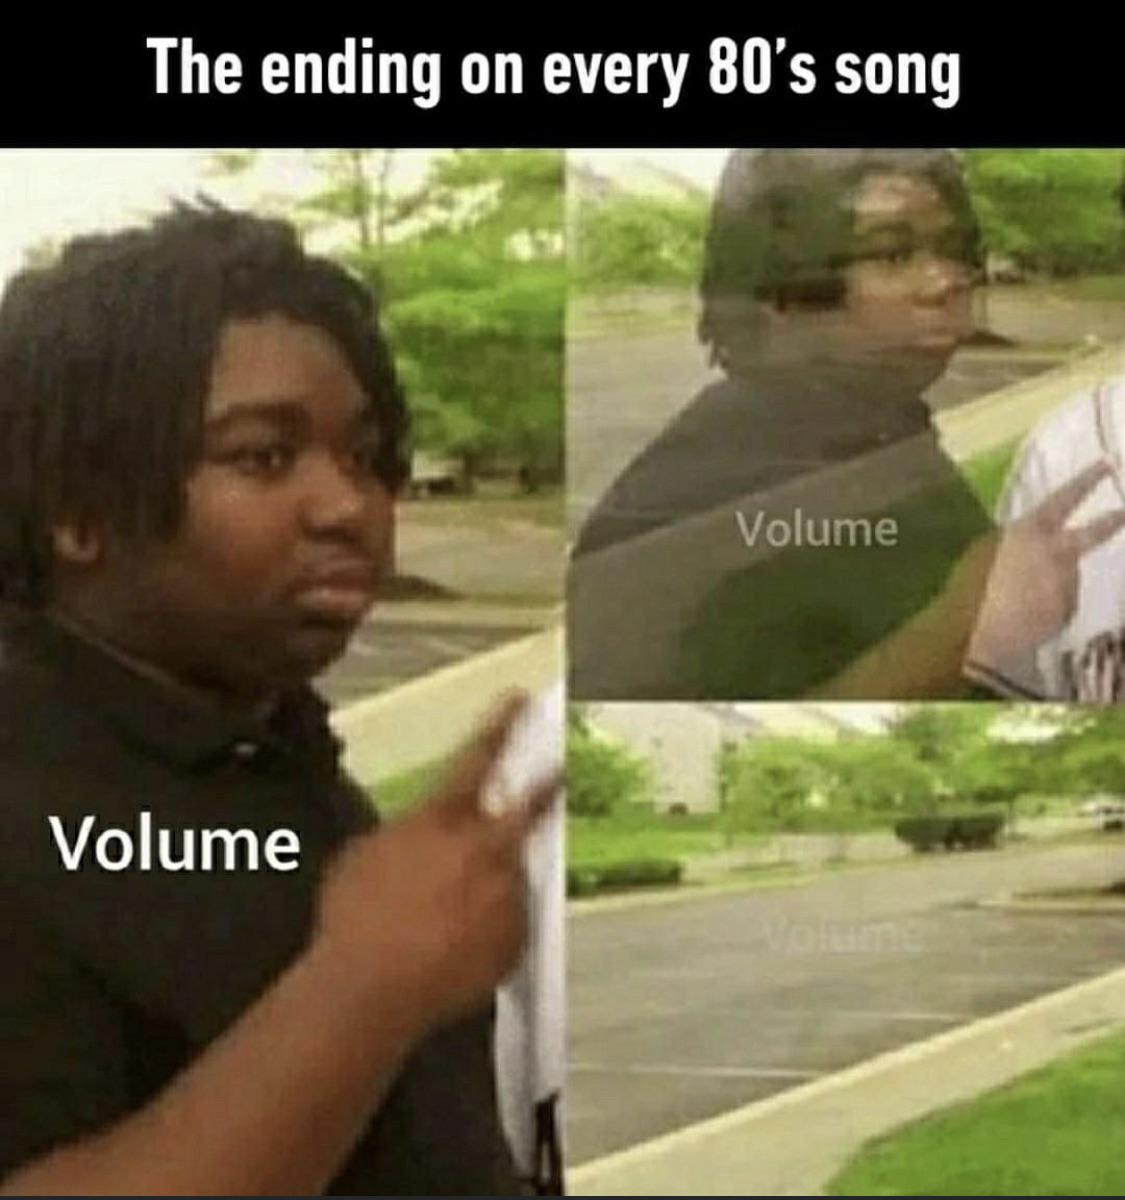 funny memes and pics - ending of every 80s song - The ending on every 80's song Volume Volume